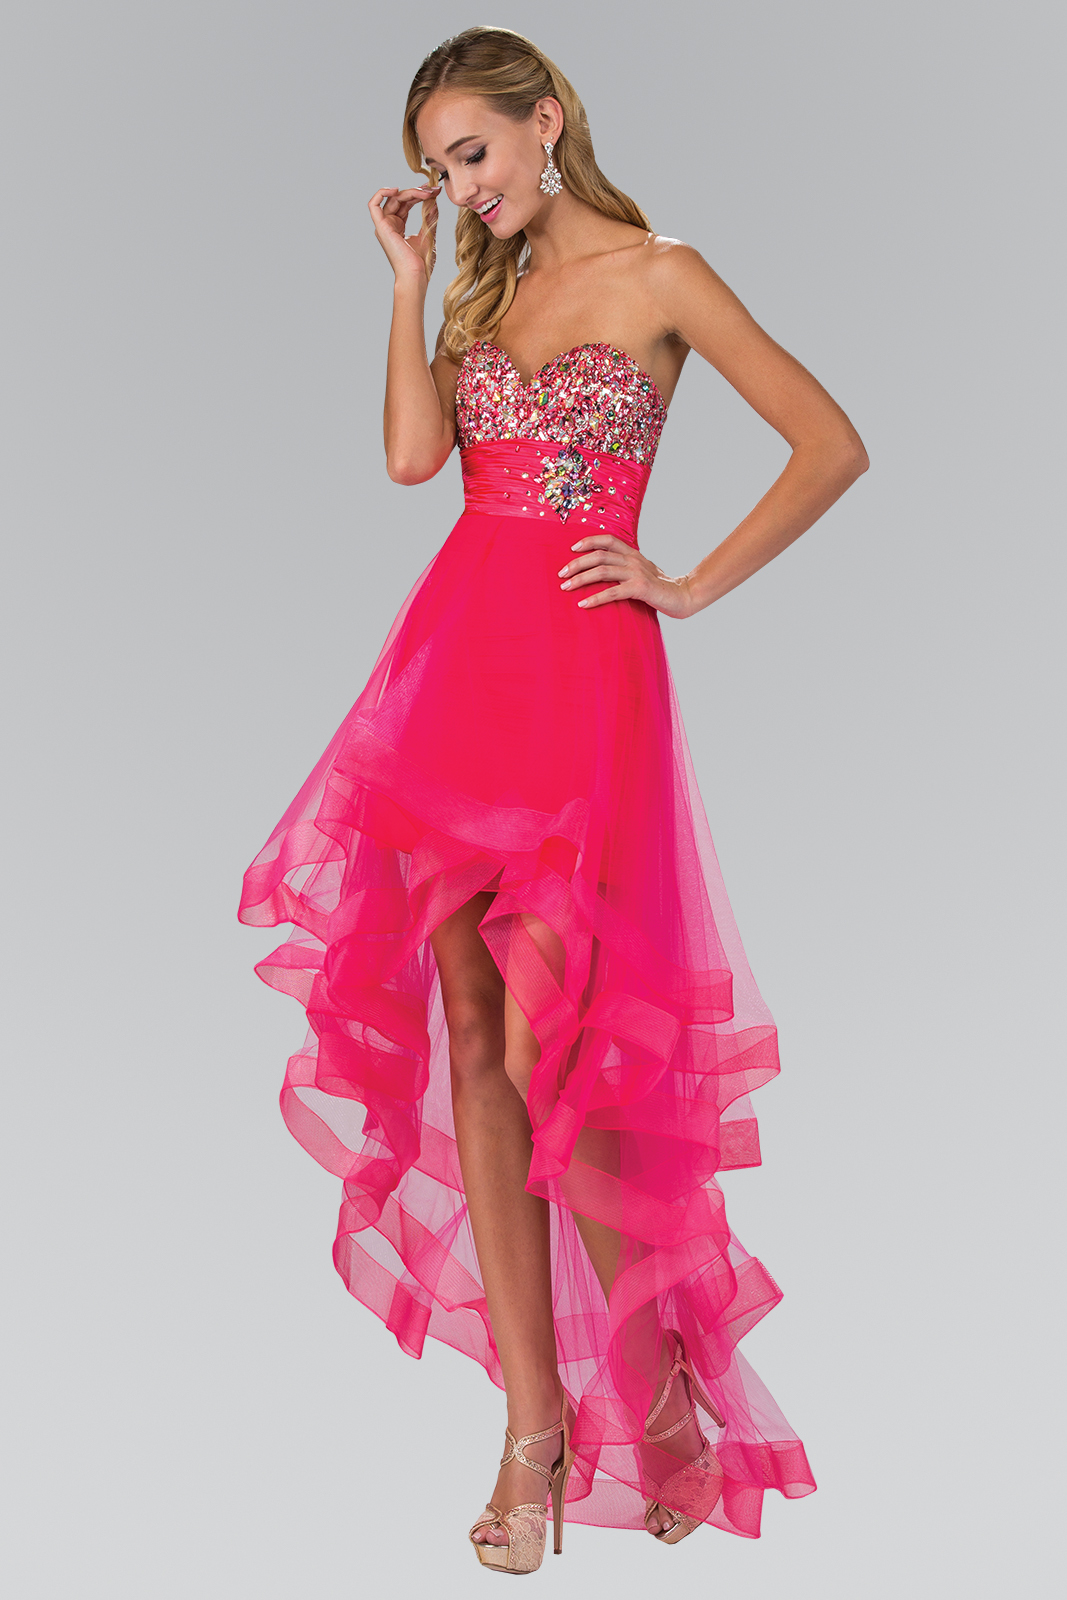 gs1124 fuchsia 1 high low prom pageant homecoming cocktail tulle jewel open back zipper strapless sweetheart high low